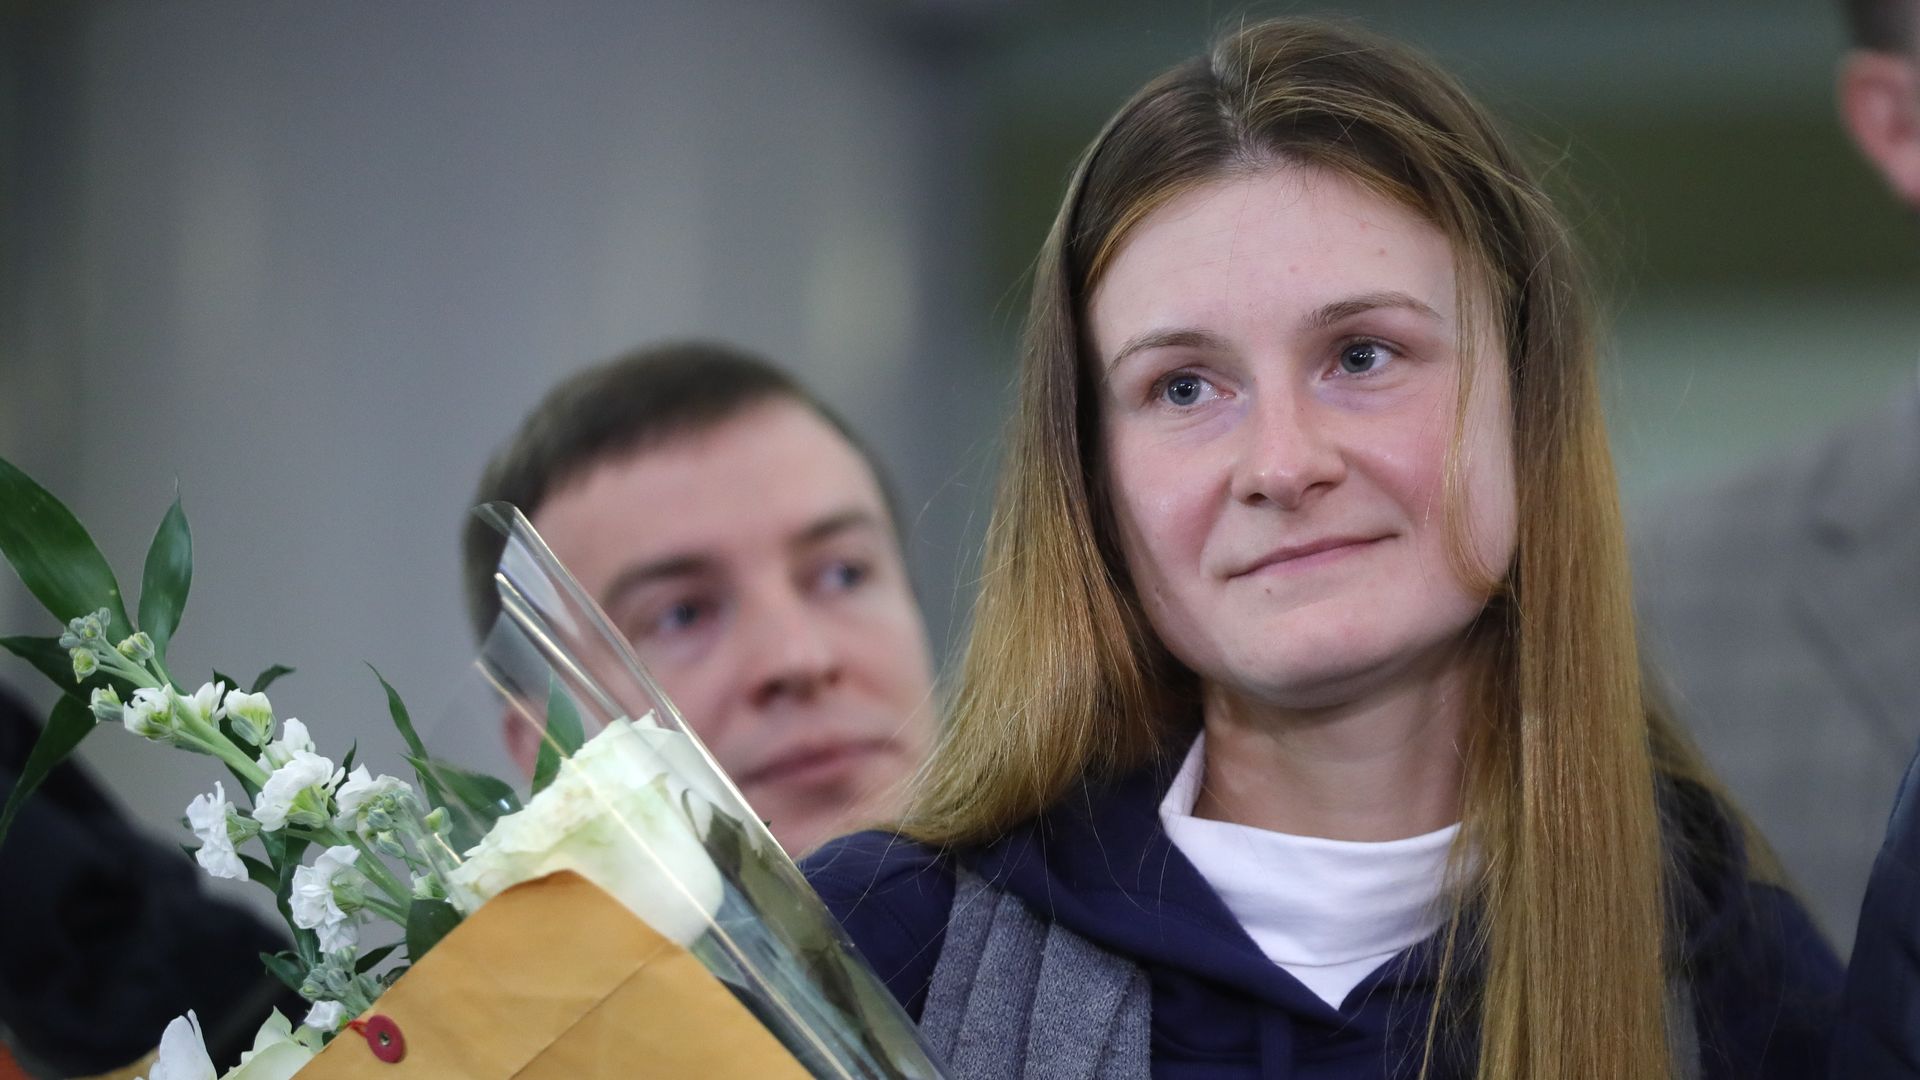 Russian citizen Maria Butina (R) is pictured at the Sheremetyevo International Airport upon arrival from the United States; Russian citizen Butina was arrested by the FBI in July 2018 in Washington DC